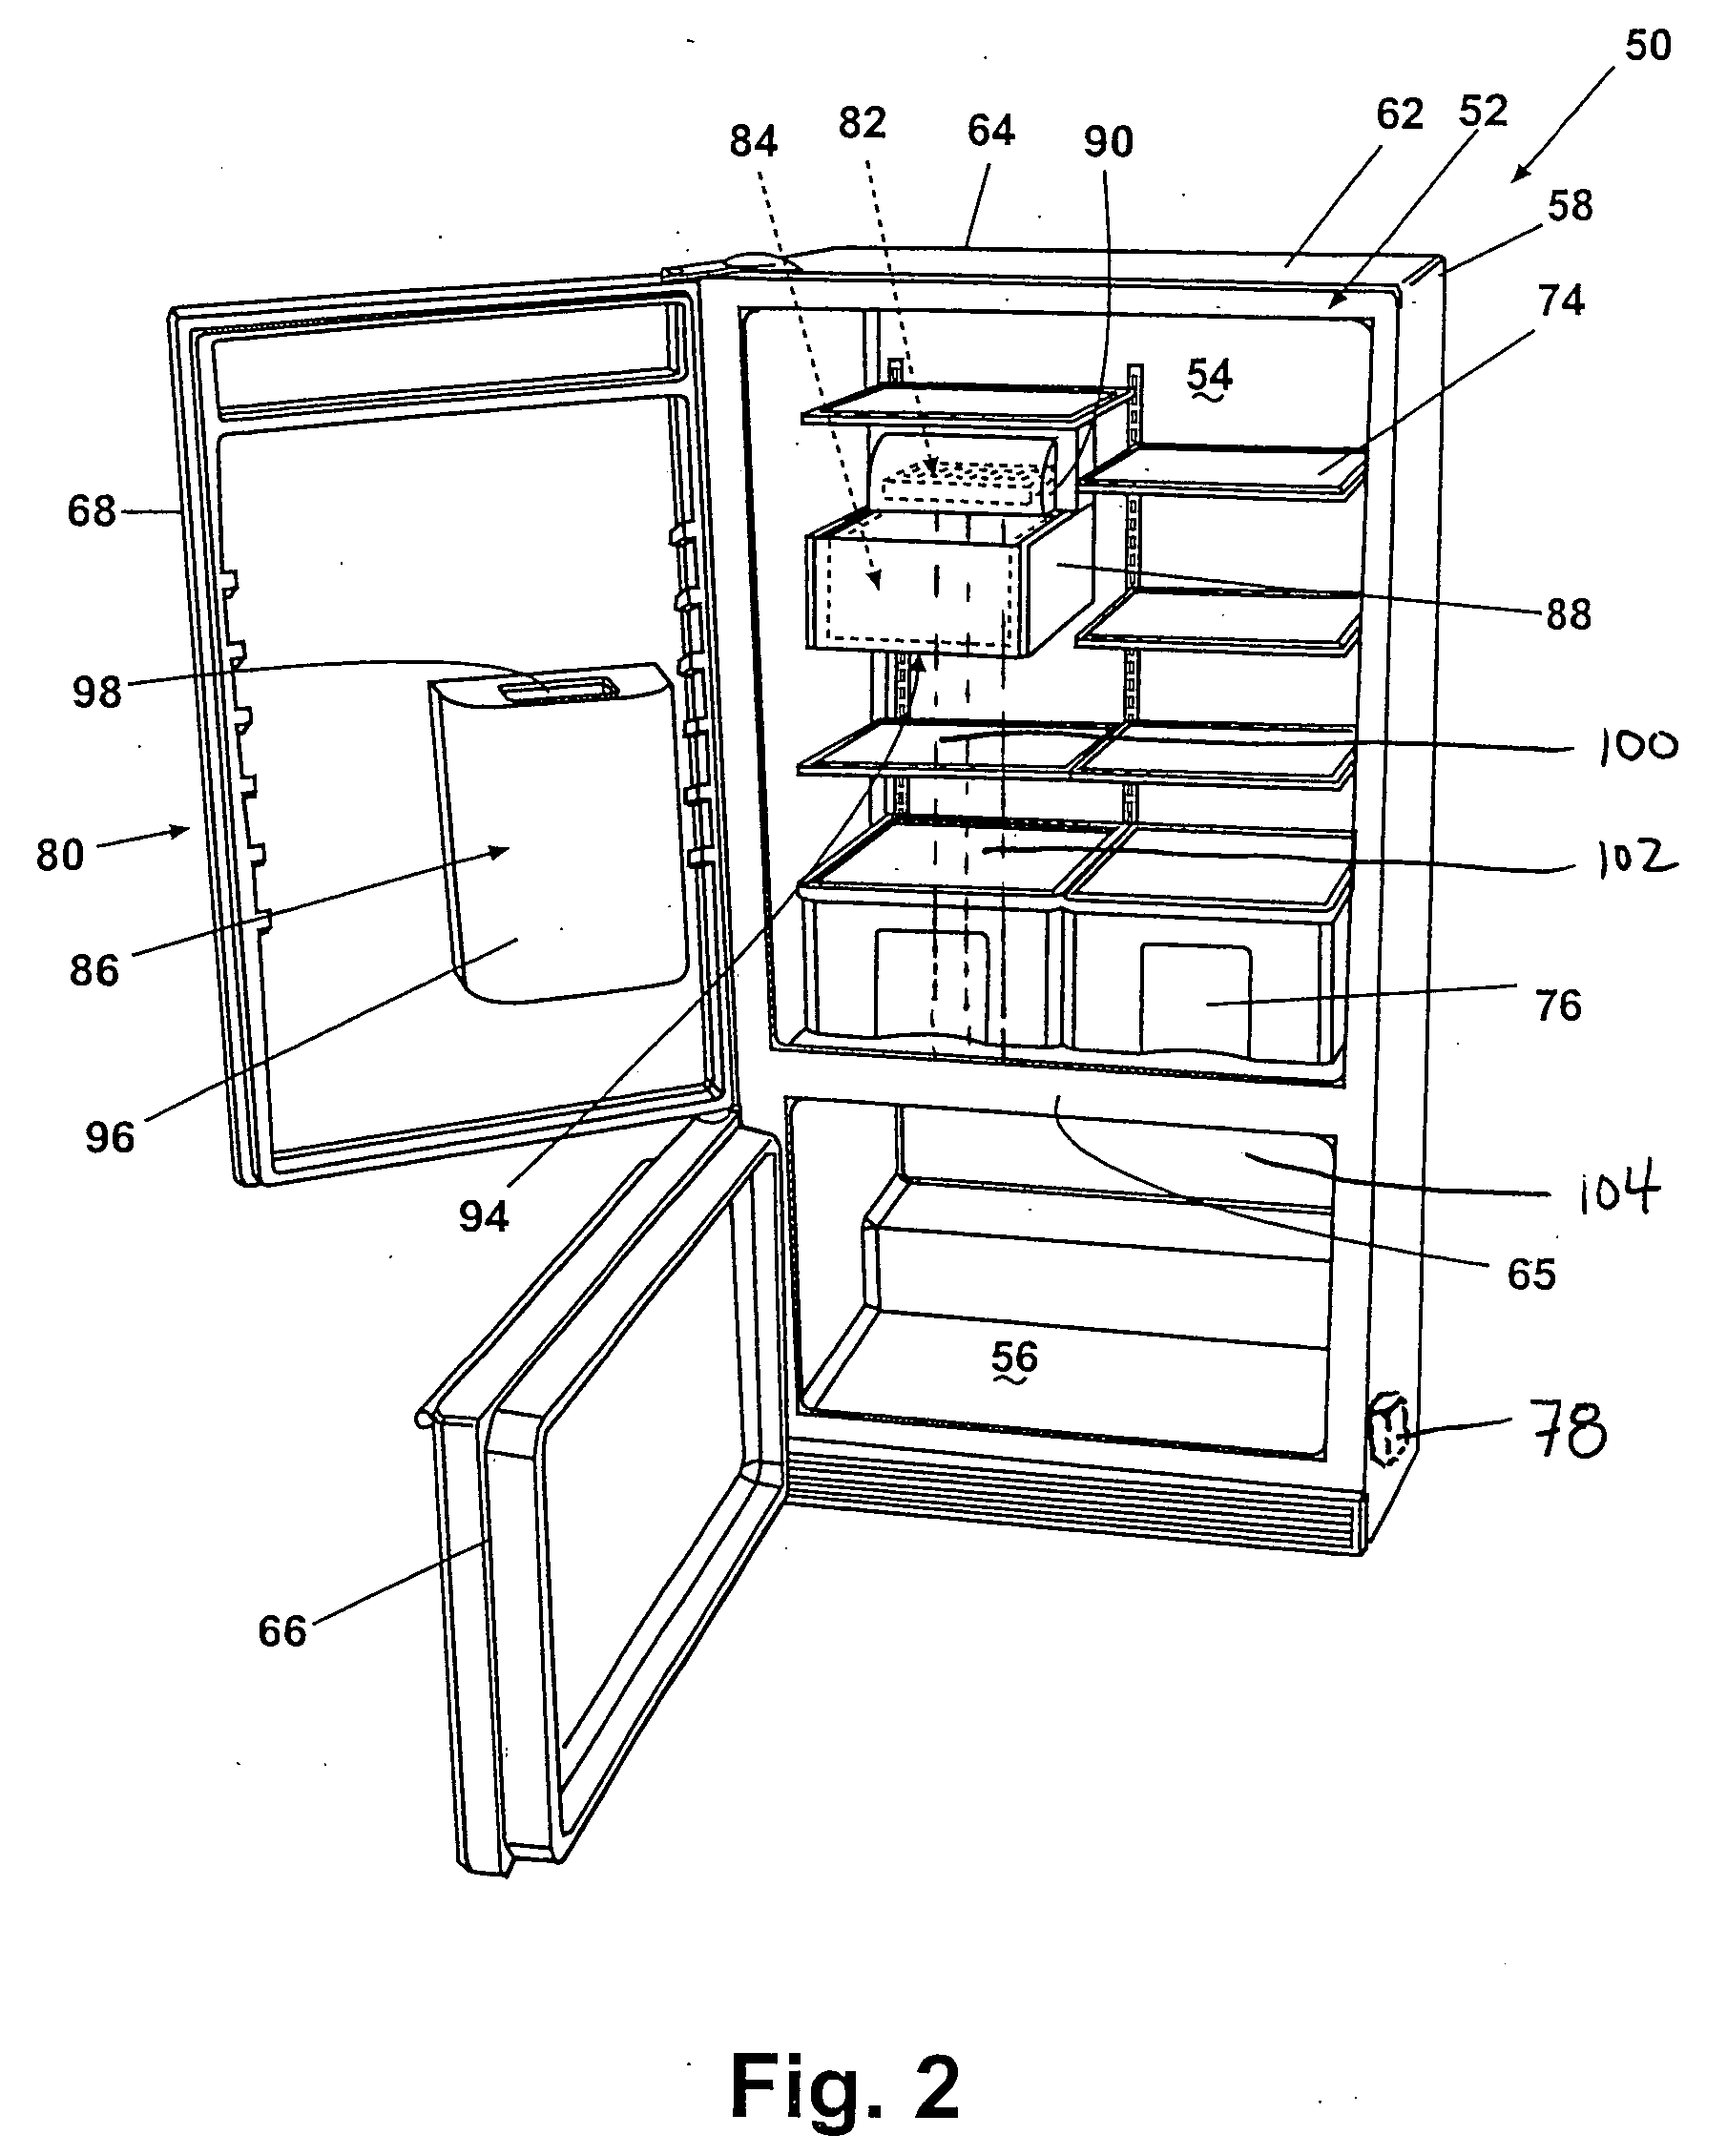 Ice making and dispensing system